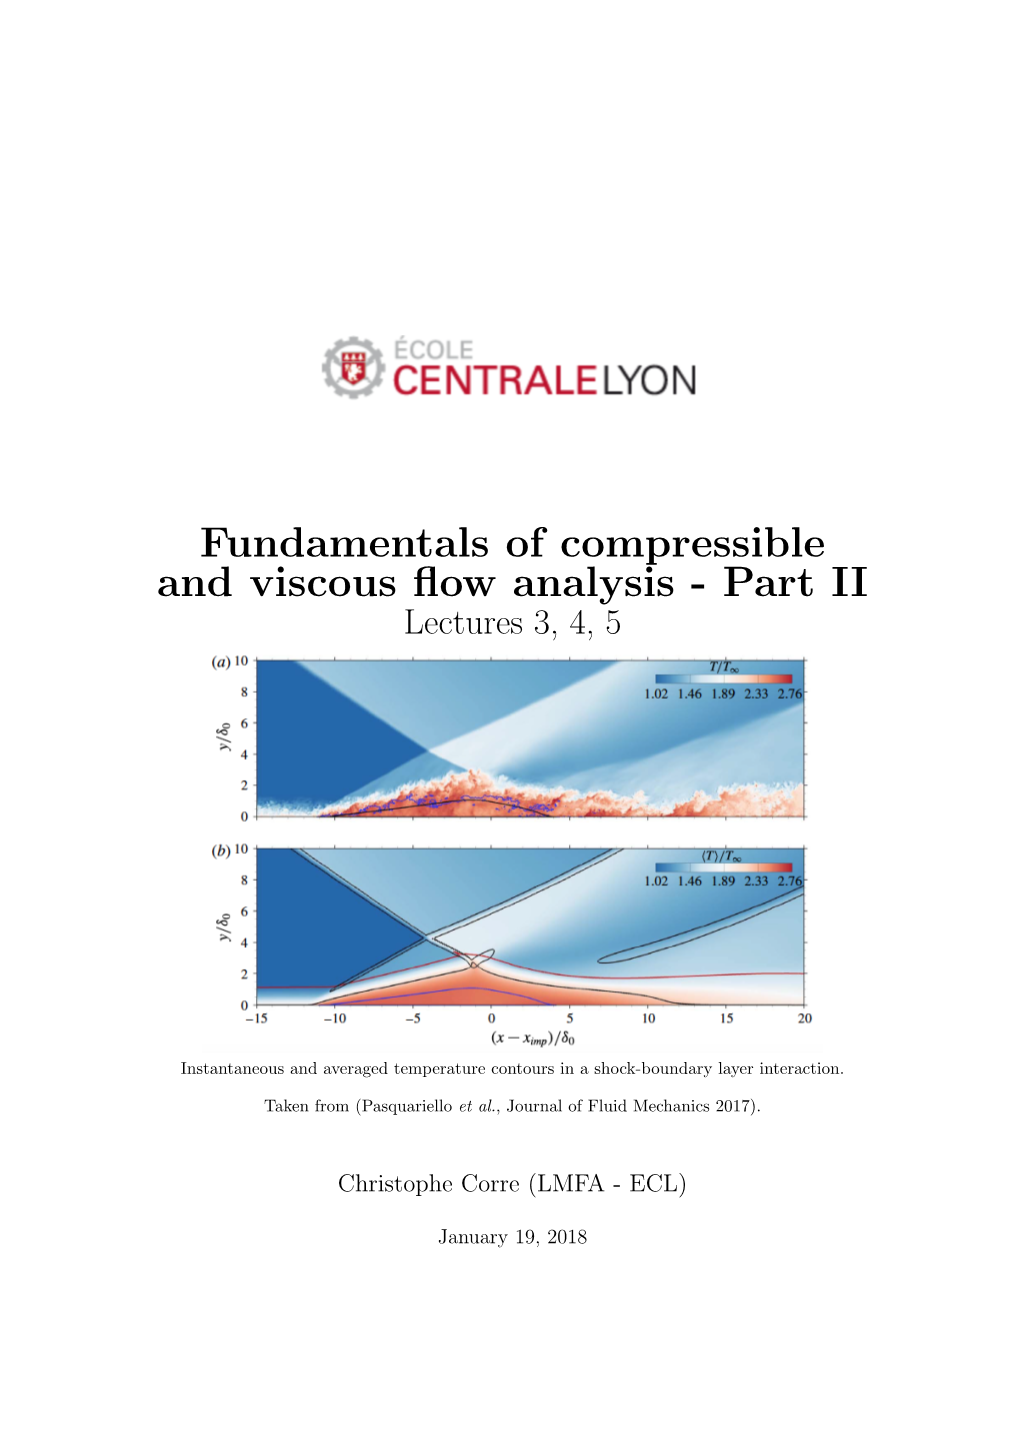 Fundamentals of Compressible and Viscous Flow Analysis